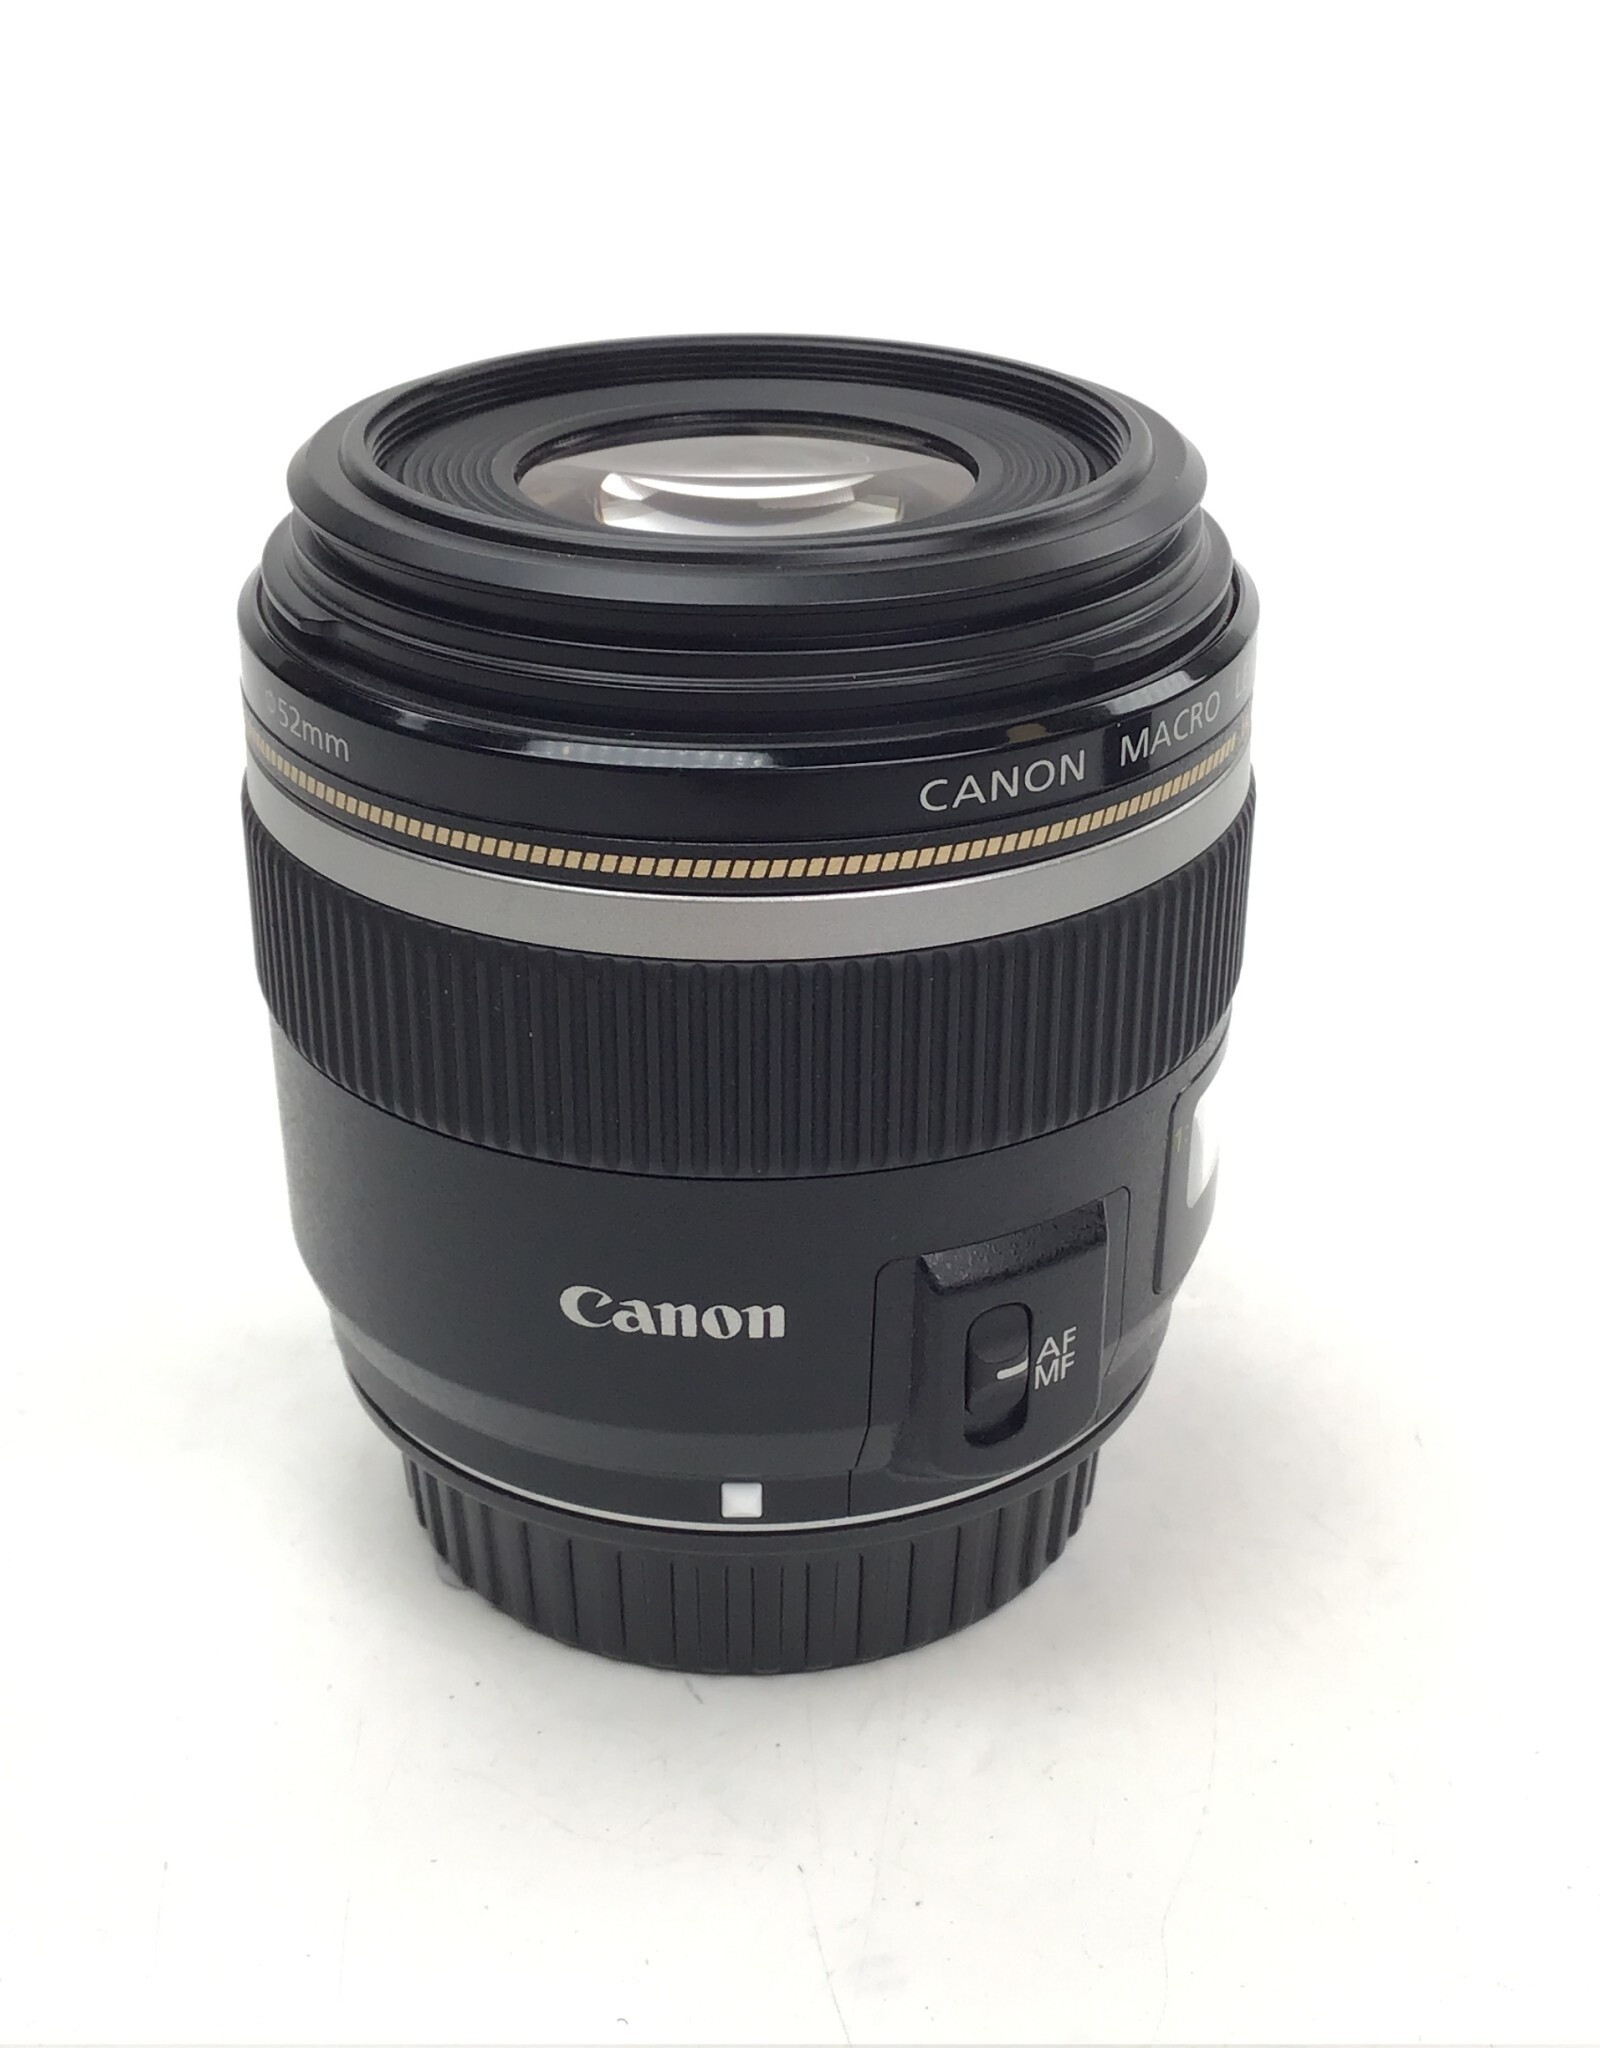 CANON Canon EF-S 60mm f2.8 USM Lens Used Good